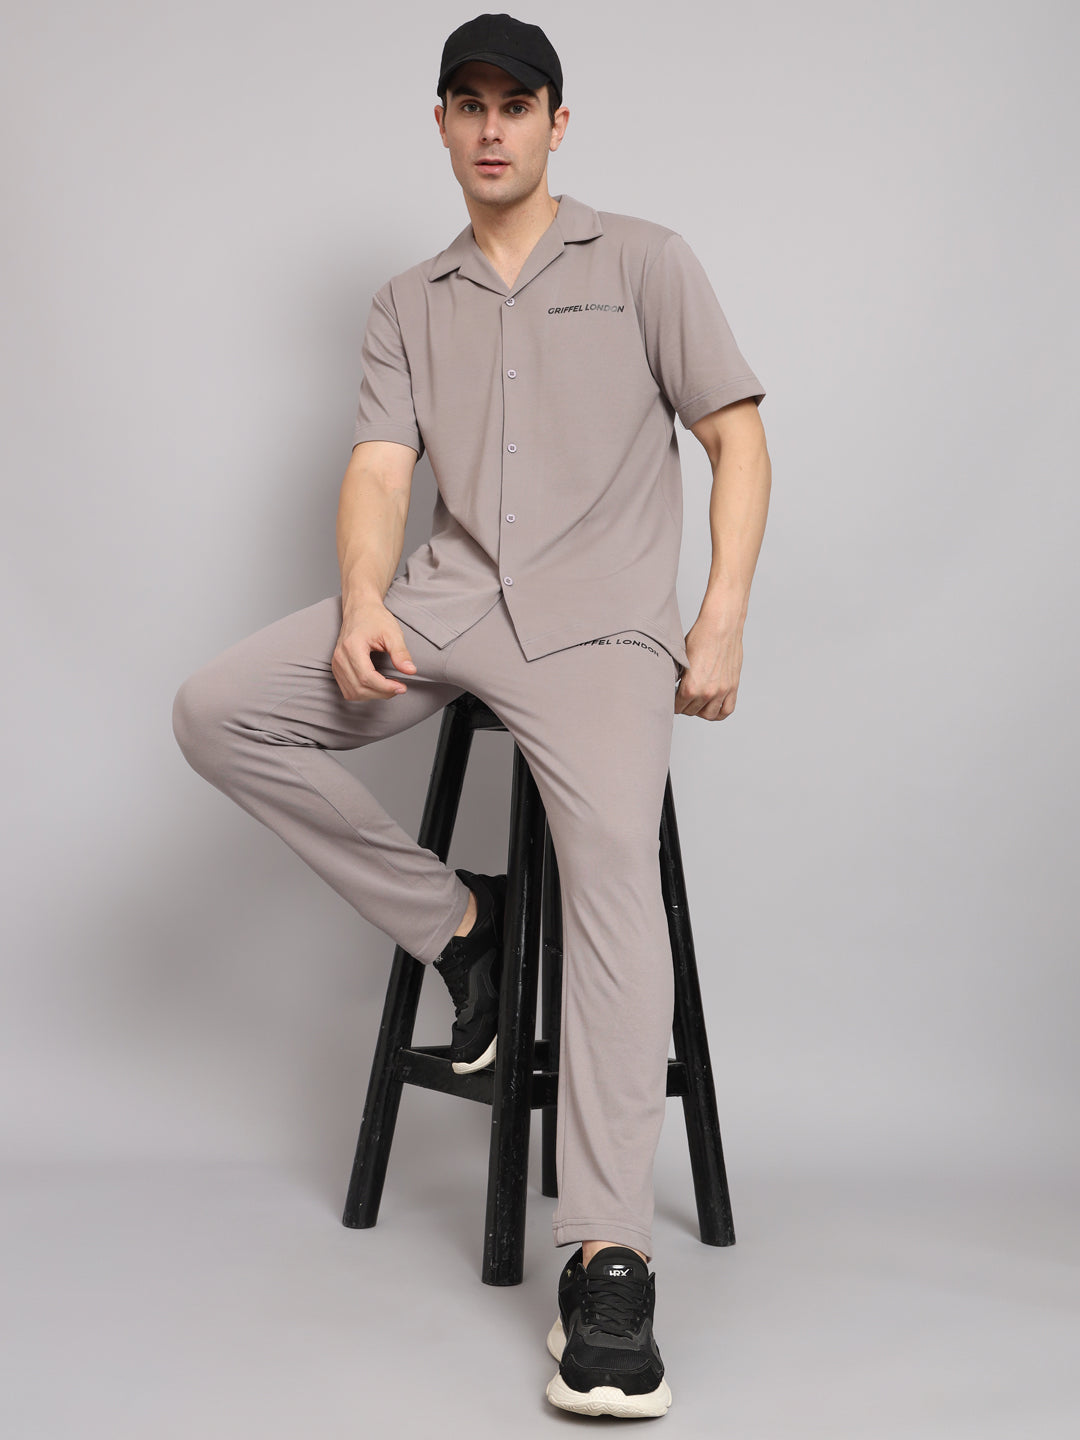 Griffel Men's Pre Winter Front Logo Solid Cotton Basic Steel Grey Bowling Shirt and Joggers Full Co-Ord Set - griffel